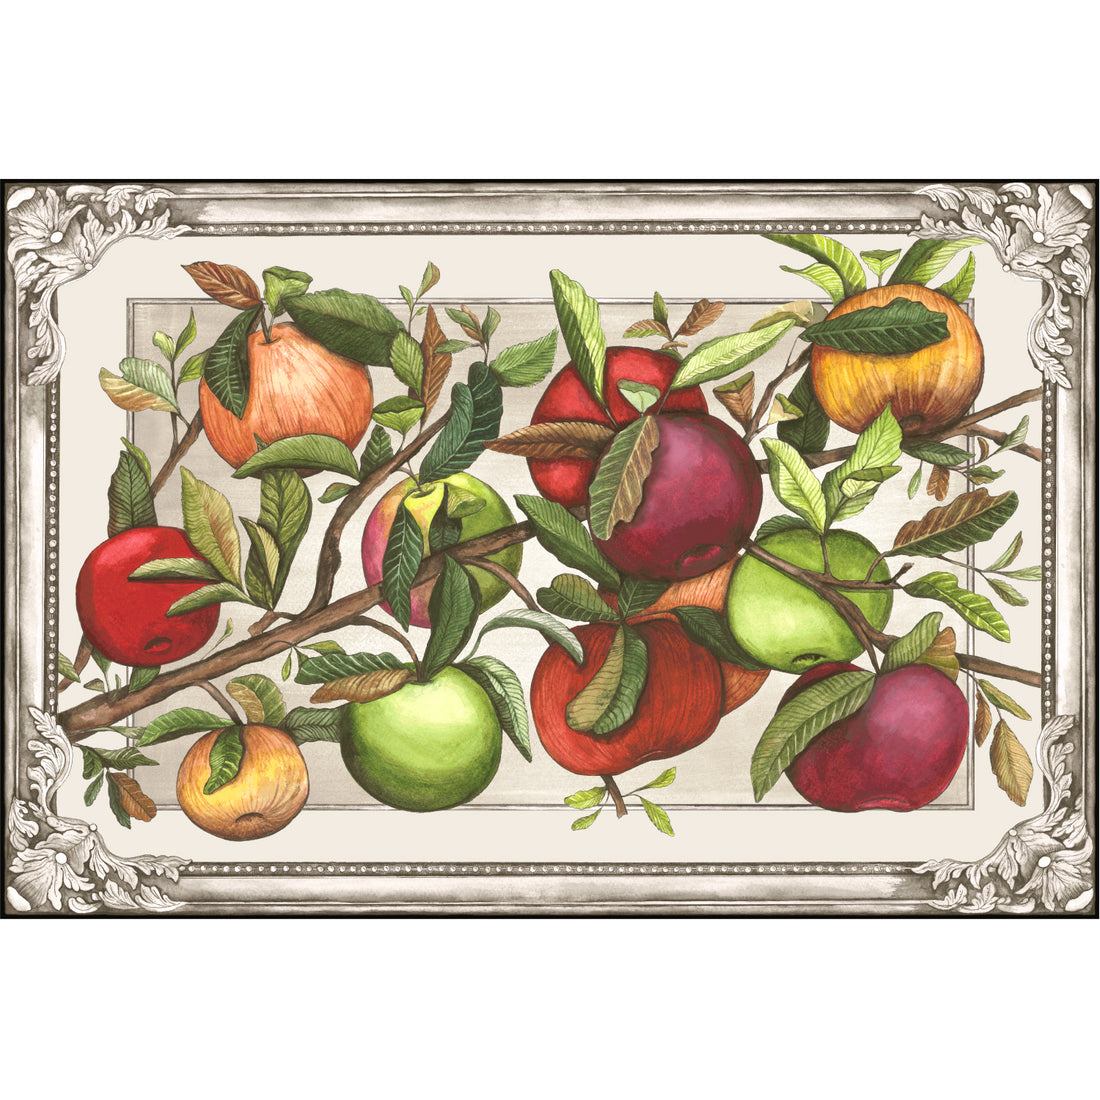 An illustrated tree branch with a dozen different apples in shades of green, red and yellow, surrounded by a greyscale ornamental frame, all on a white background.